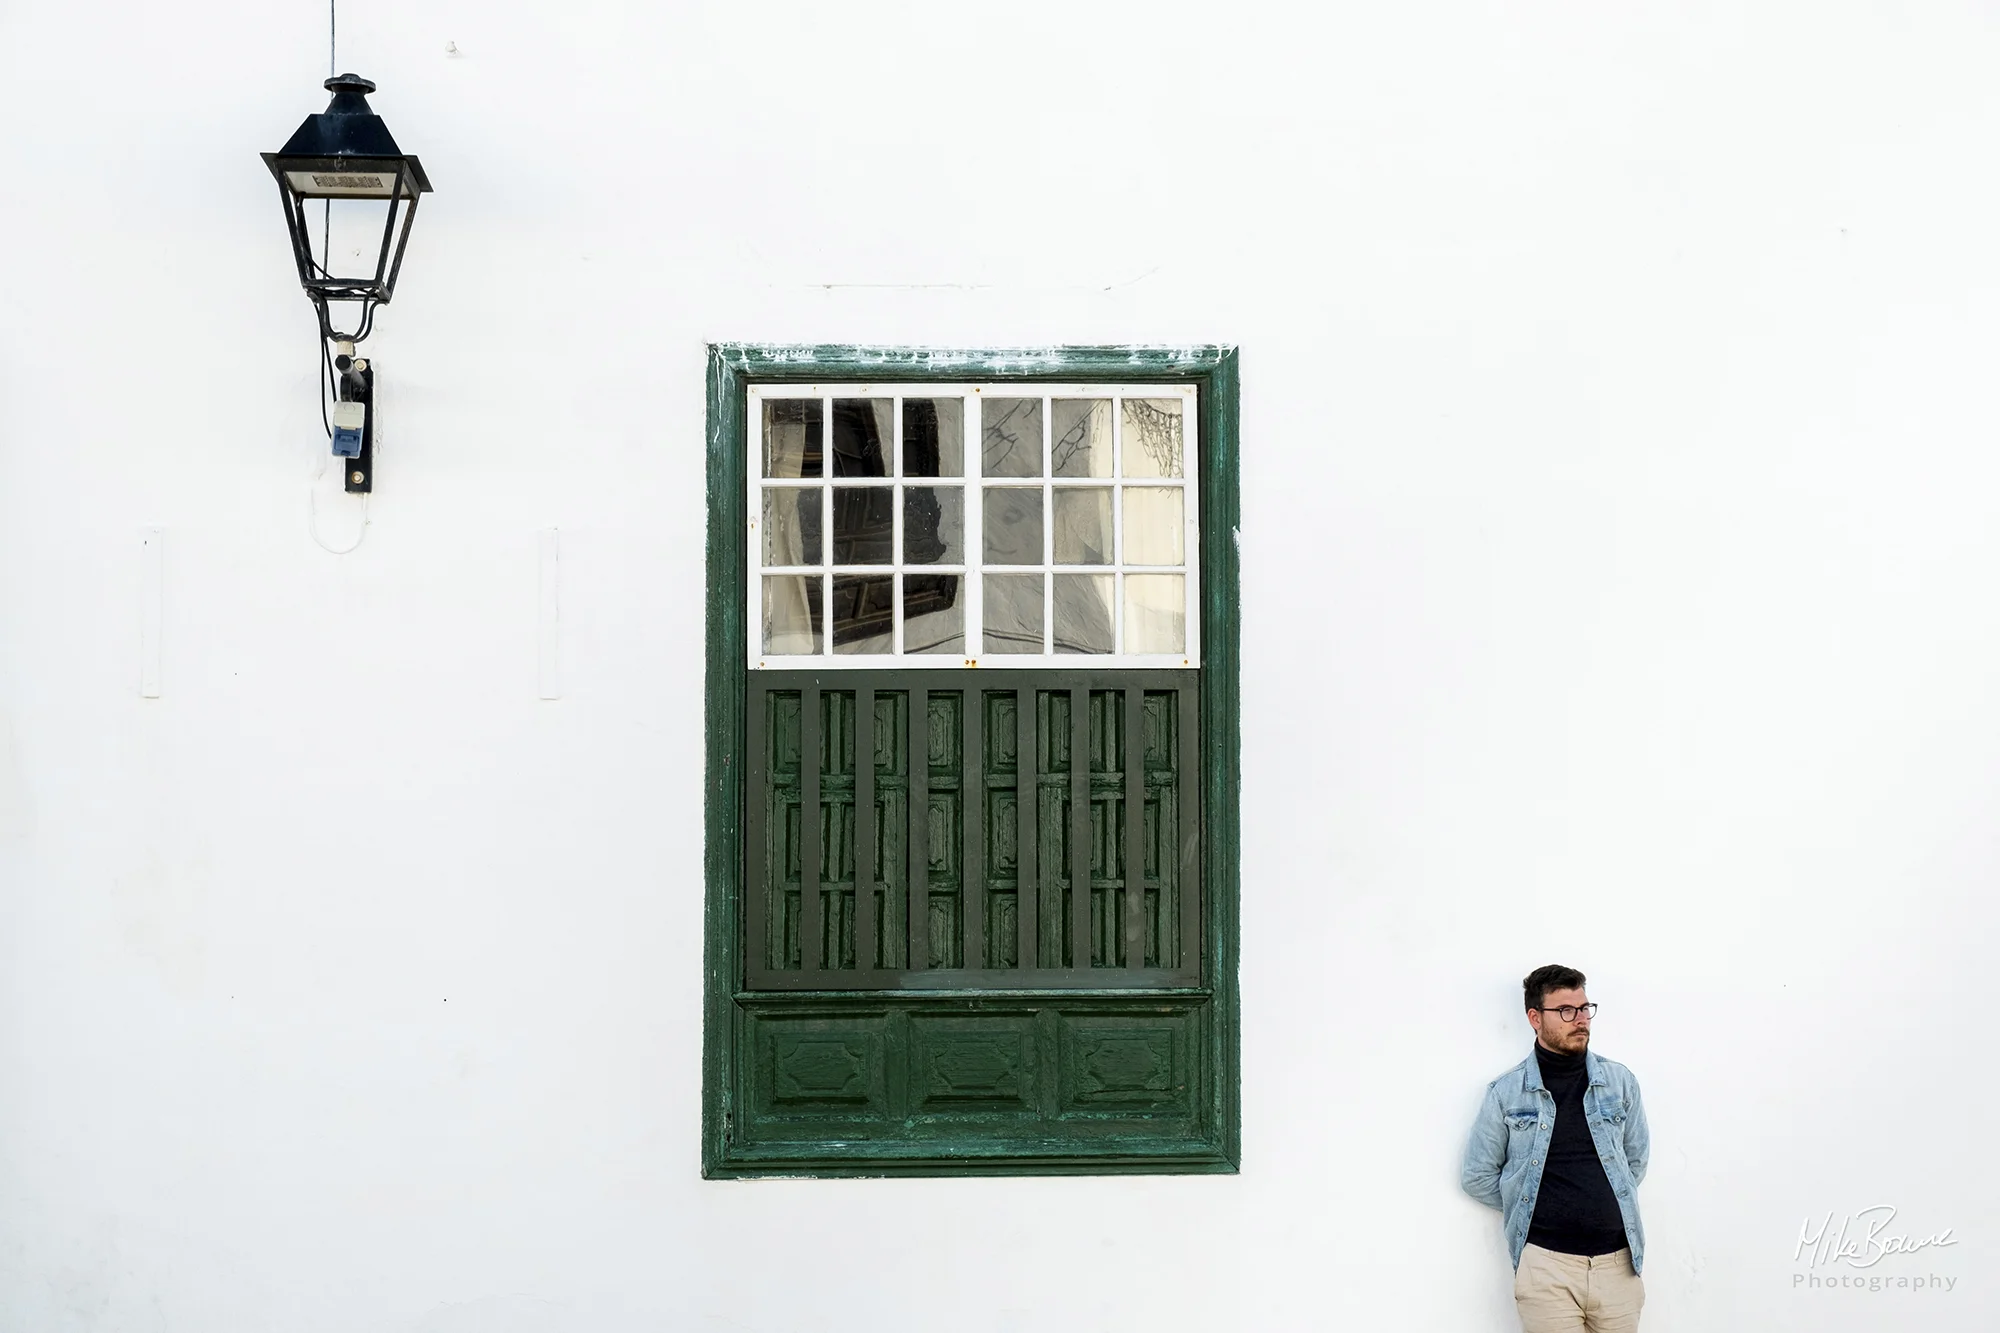 Man leaning against a white wall with large green door and ornate street lamp in Teguise, Lanzarote